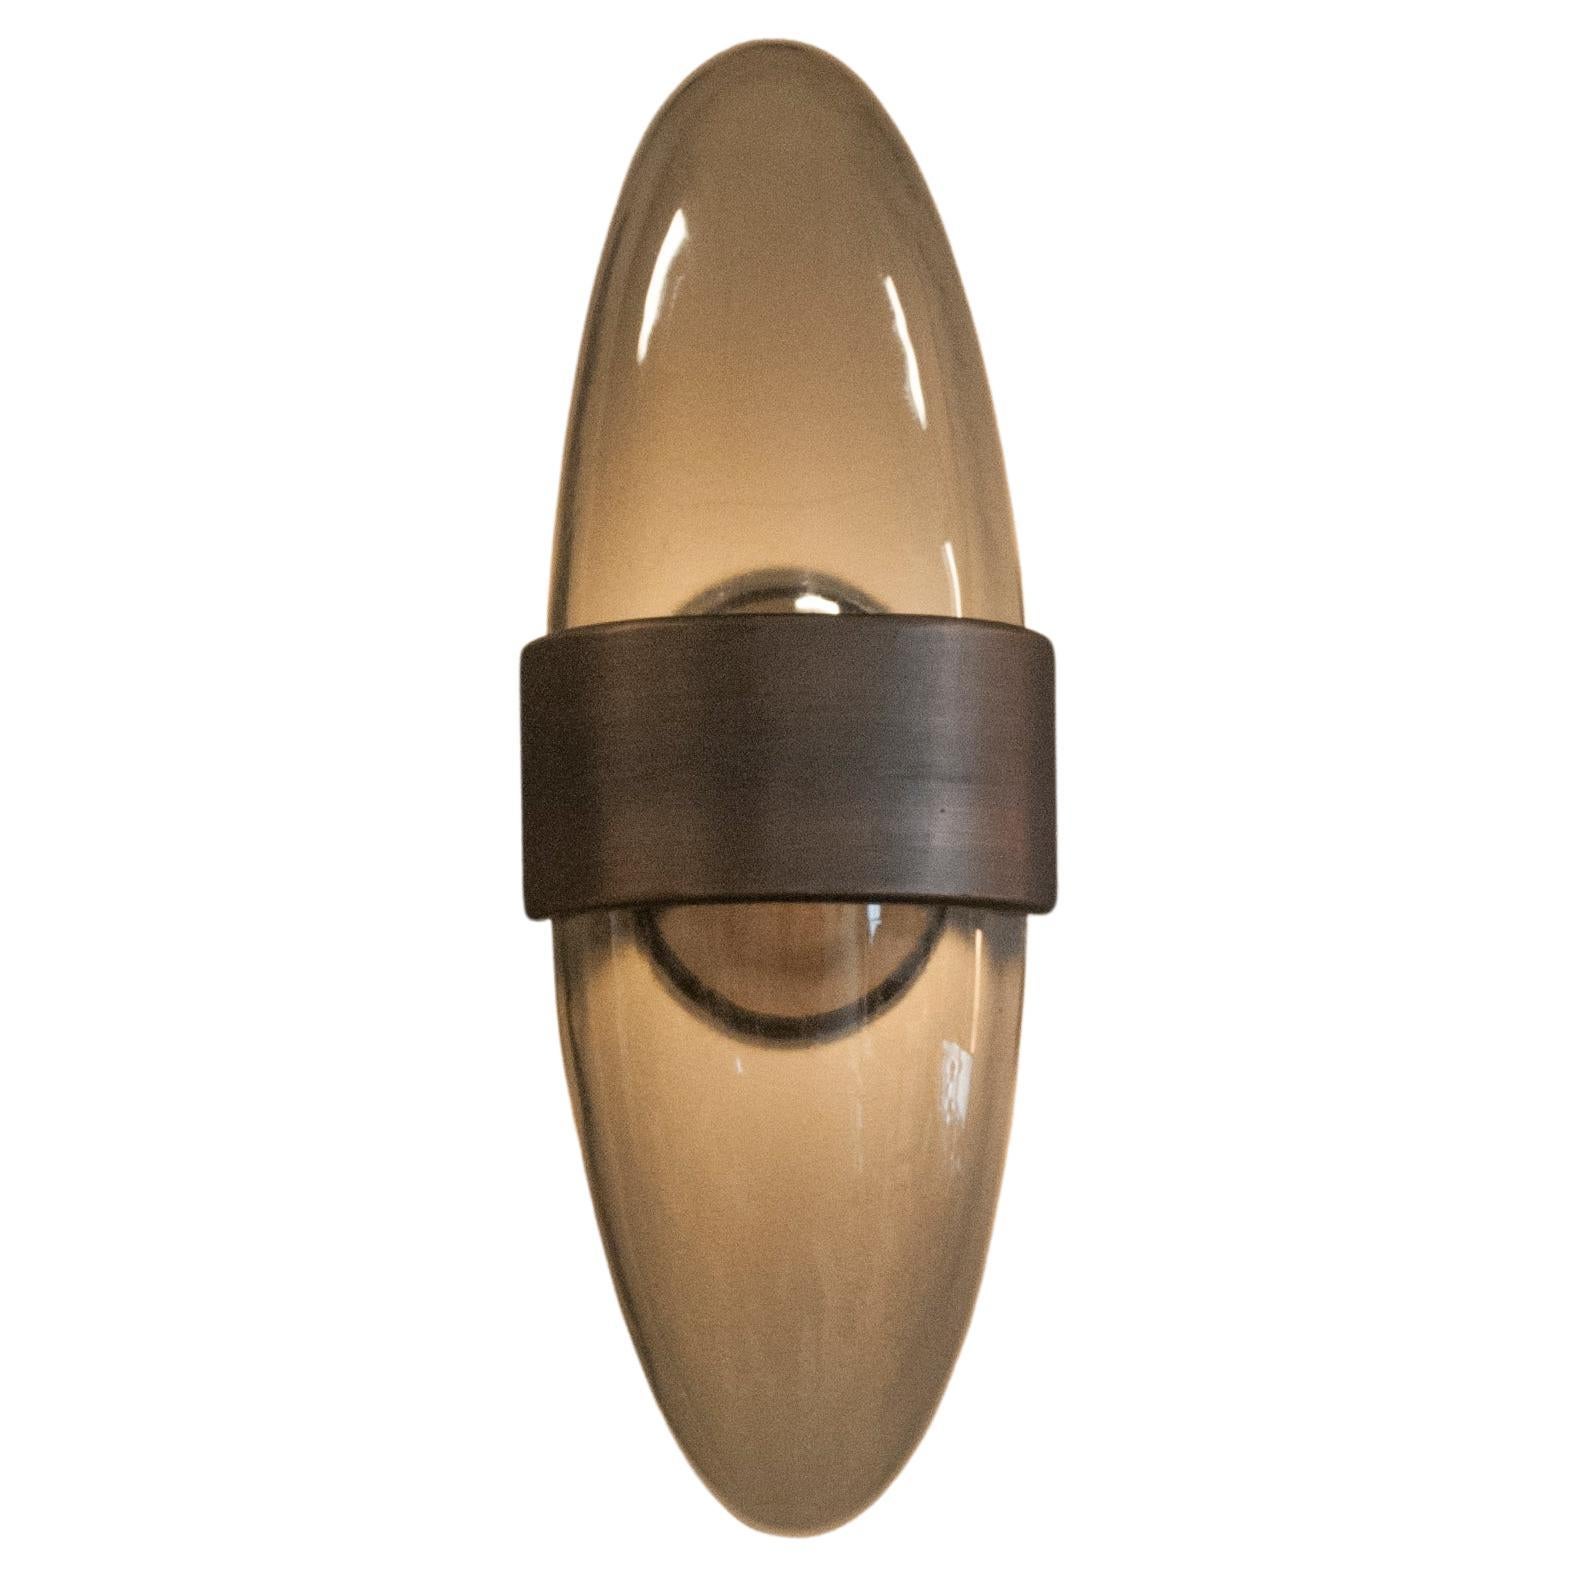 The Sophia sconce is the perfect marriage of Glass and Bronze.
Designed by Sam Hilliard 2017
Cast Bronze / Kiln formed Glass 
Made in Arcata CA, USA
UL listed.
 